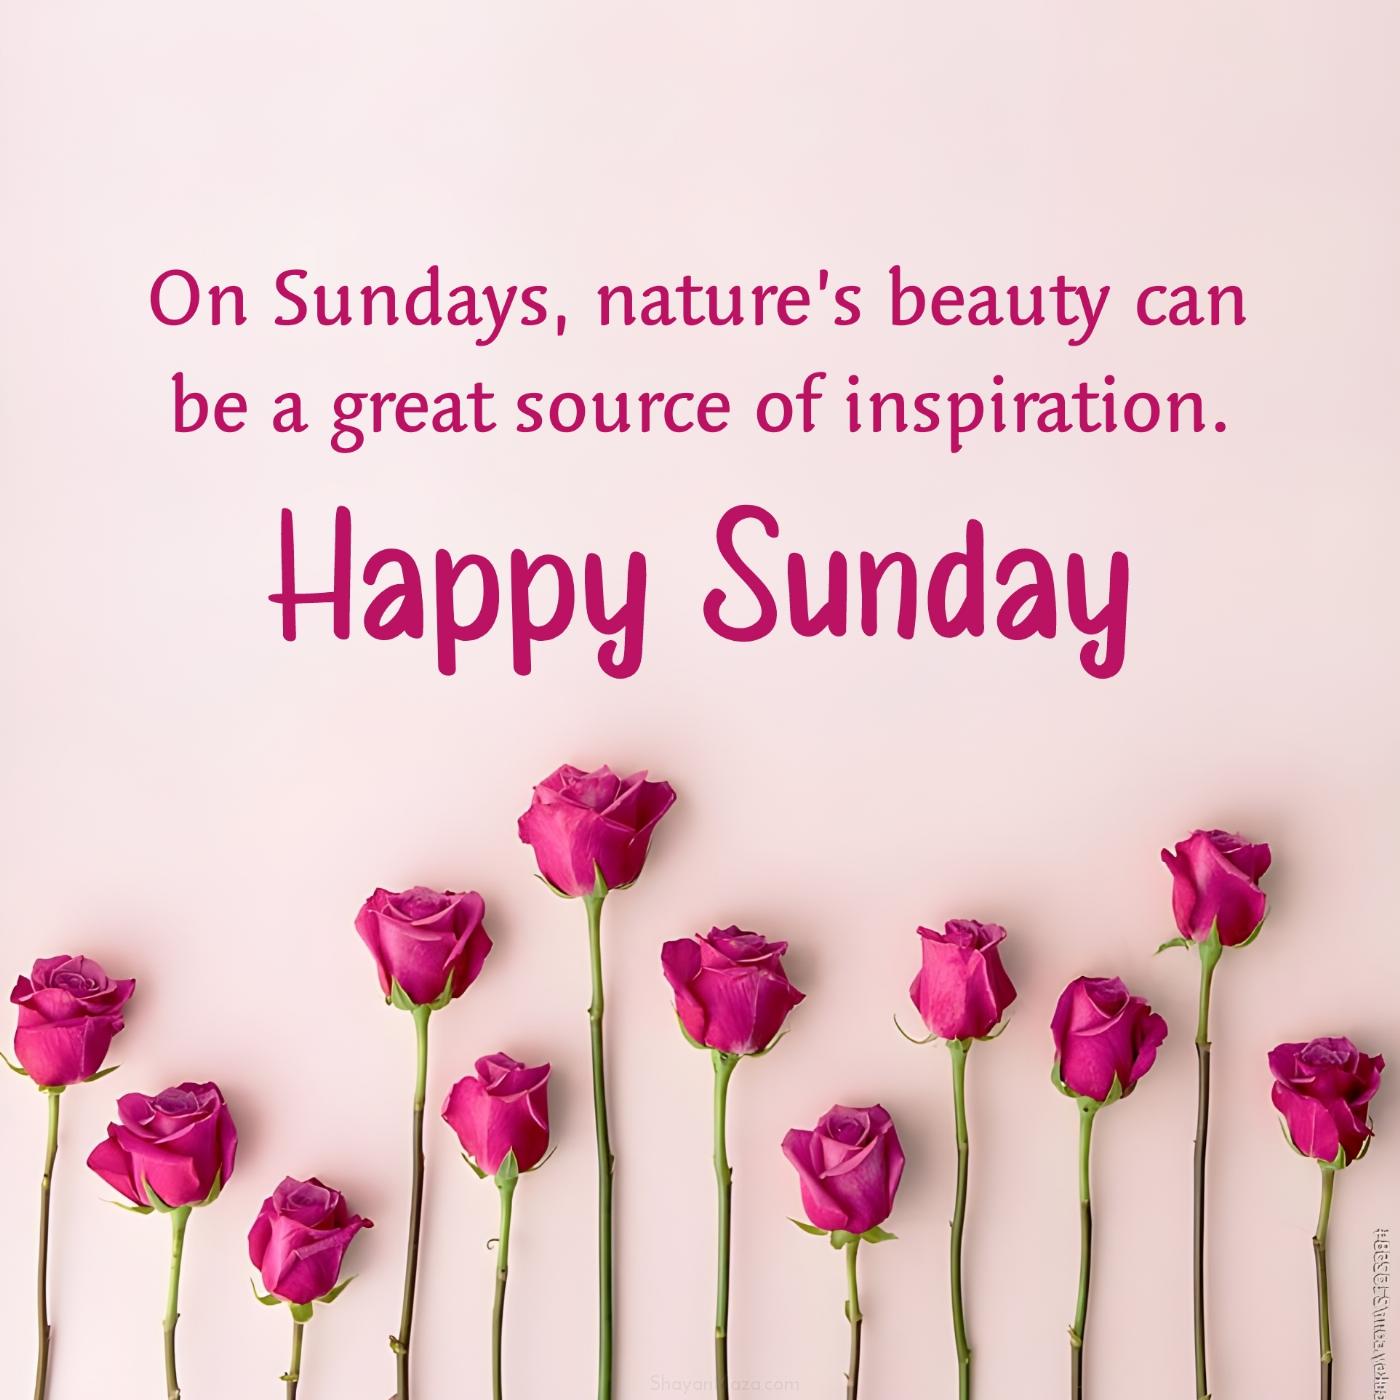 On Sundays natures beauty can be a great source of inspiration